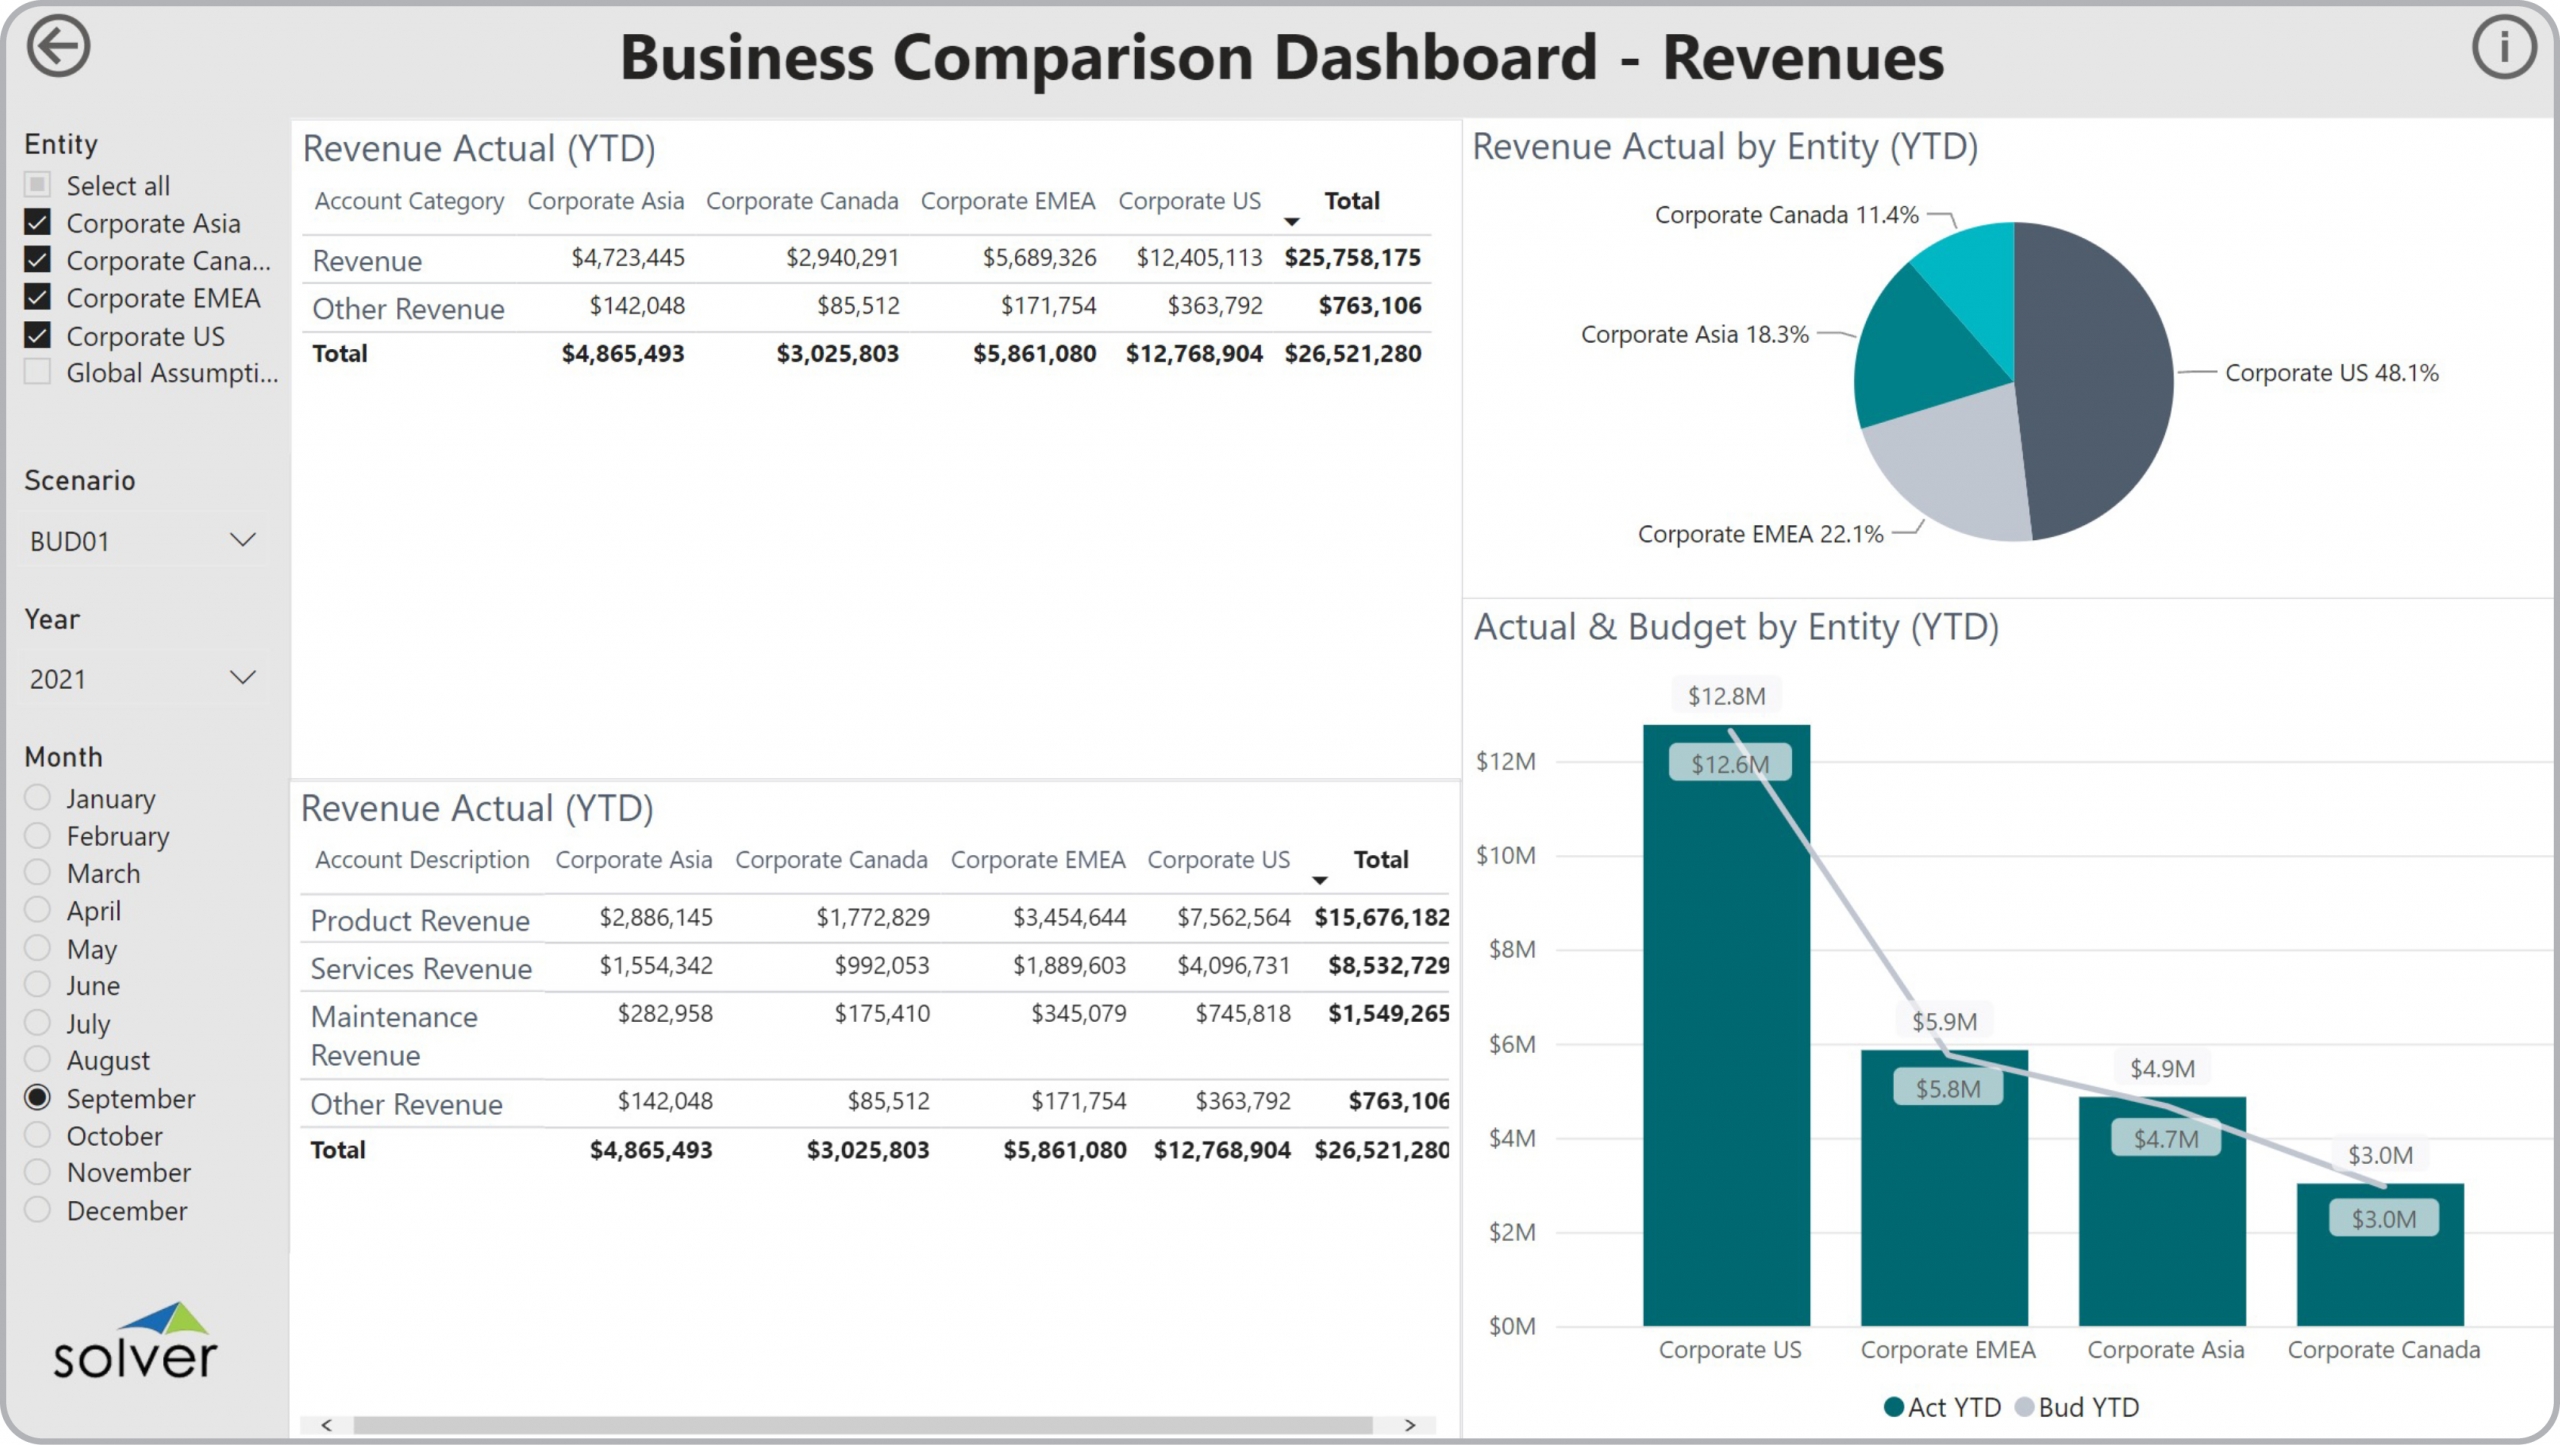 Example of a Revenue Comparison and Consolidation Dashboard to Streamline the Monthly Reporting & Consolidations Process